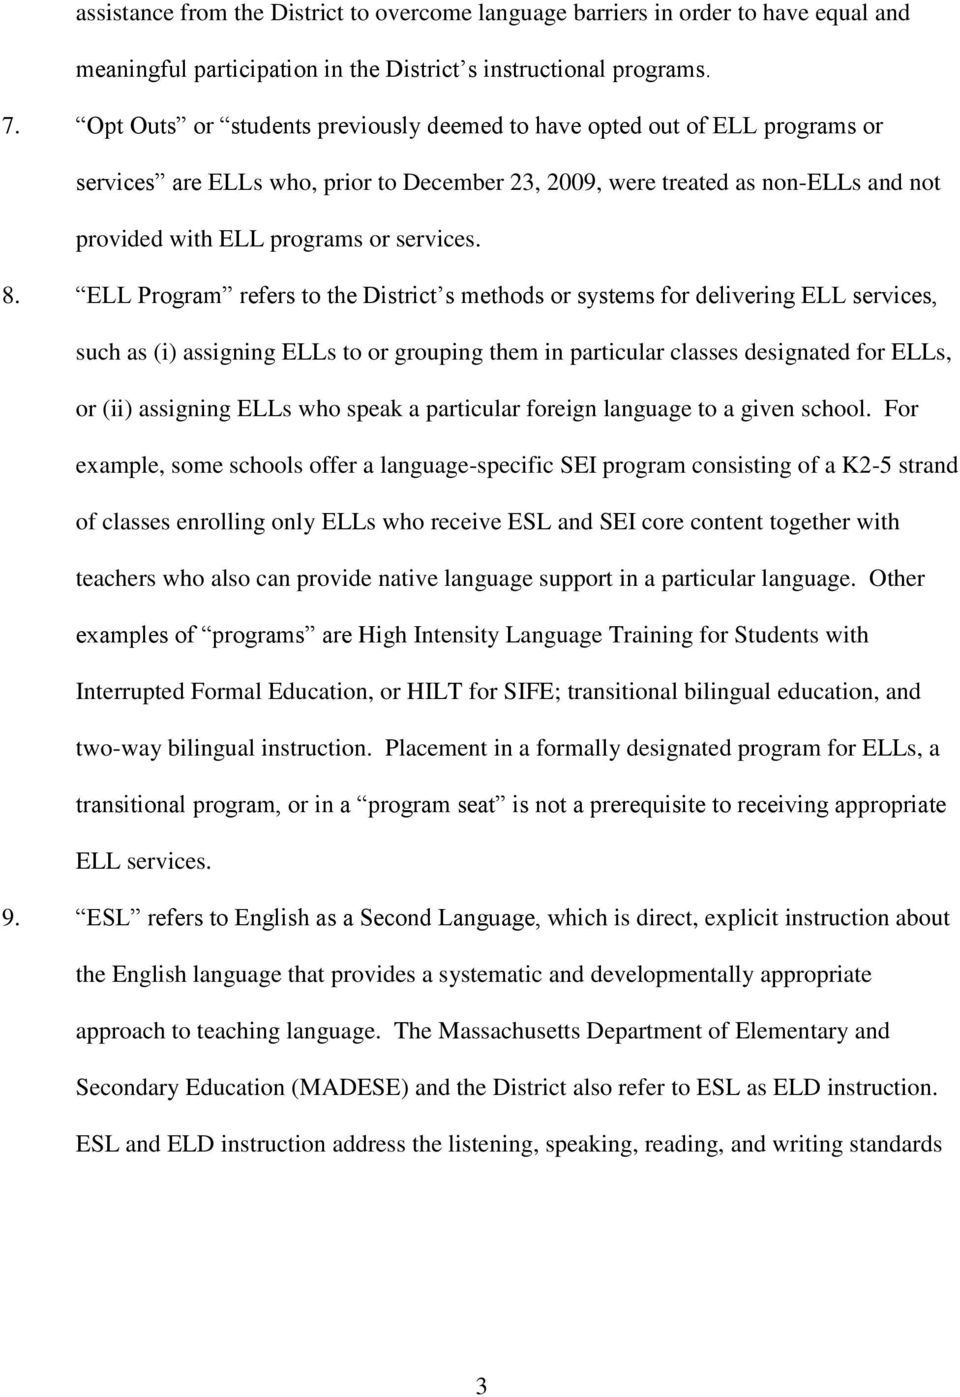 8. ELL Program refers to the District s methods or systems for delivering ELL services, such as (i) assigning ELLs to or grouping them in particular classes designated for ELLs, or (ii) assigning